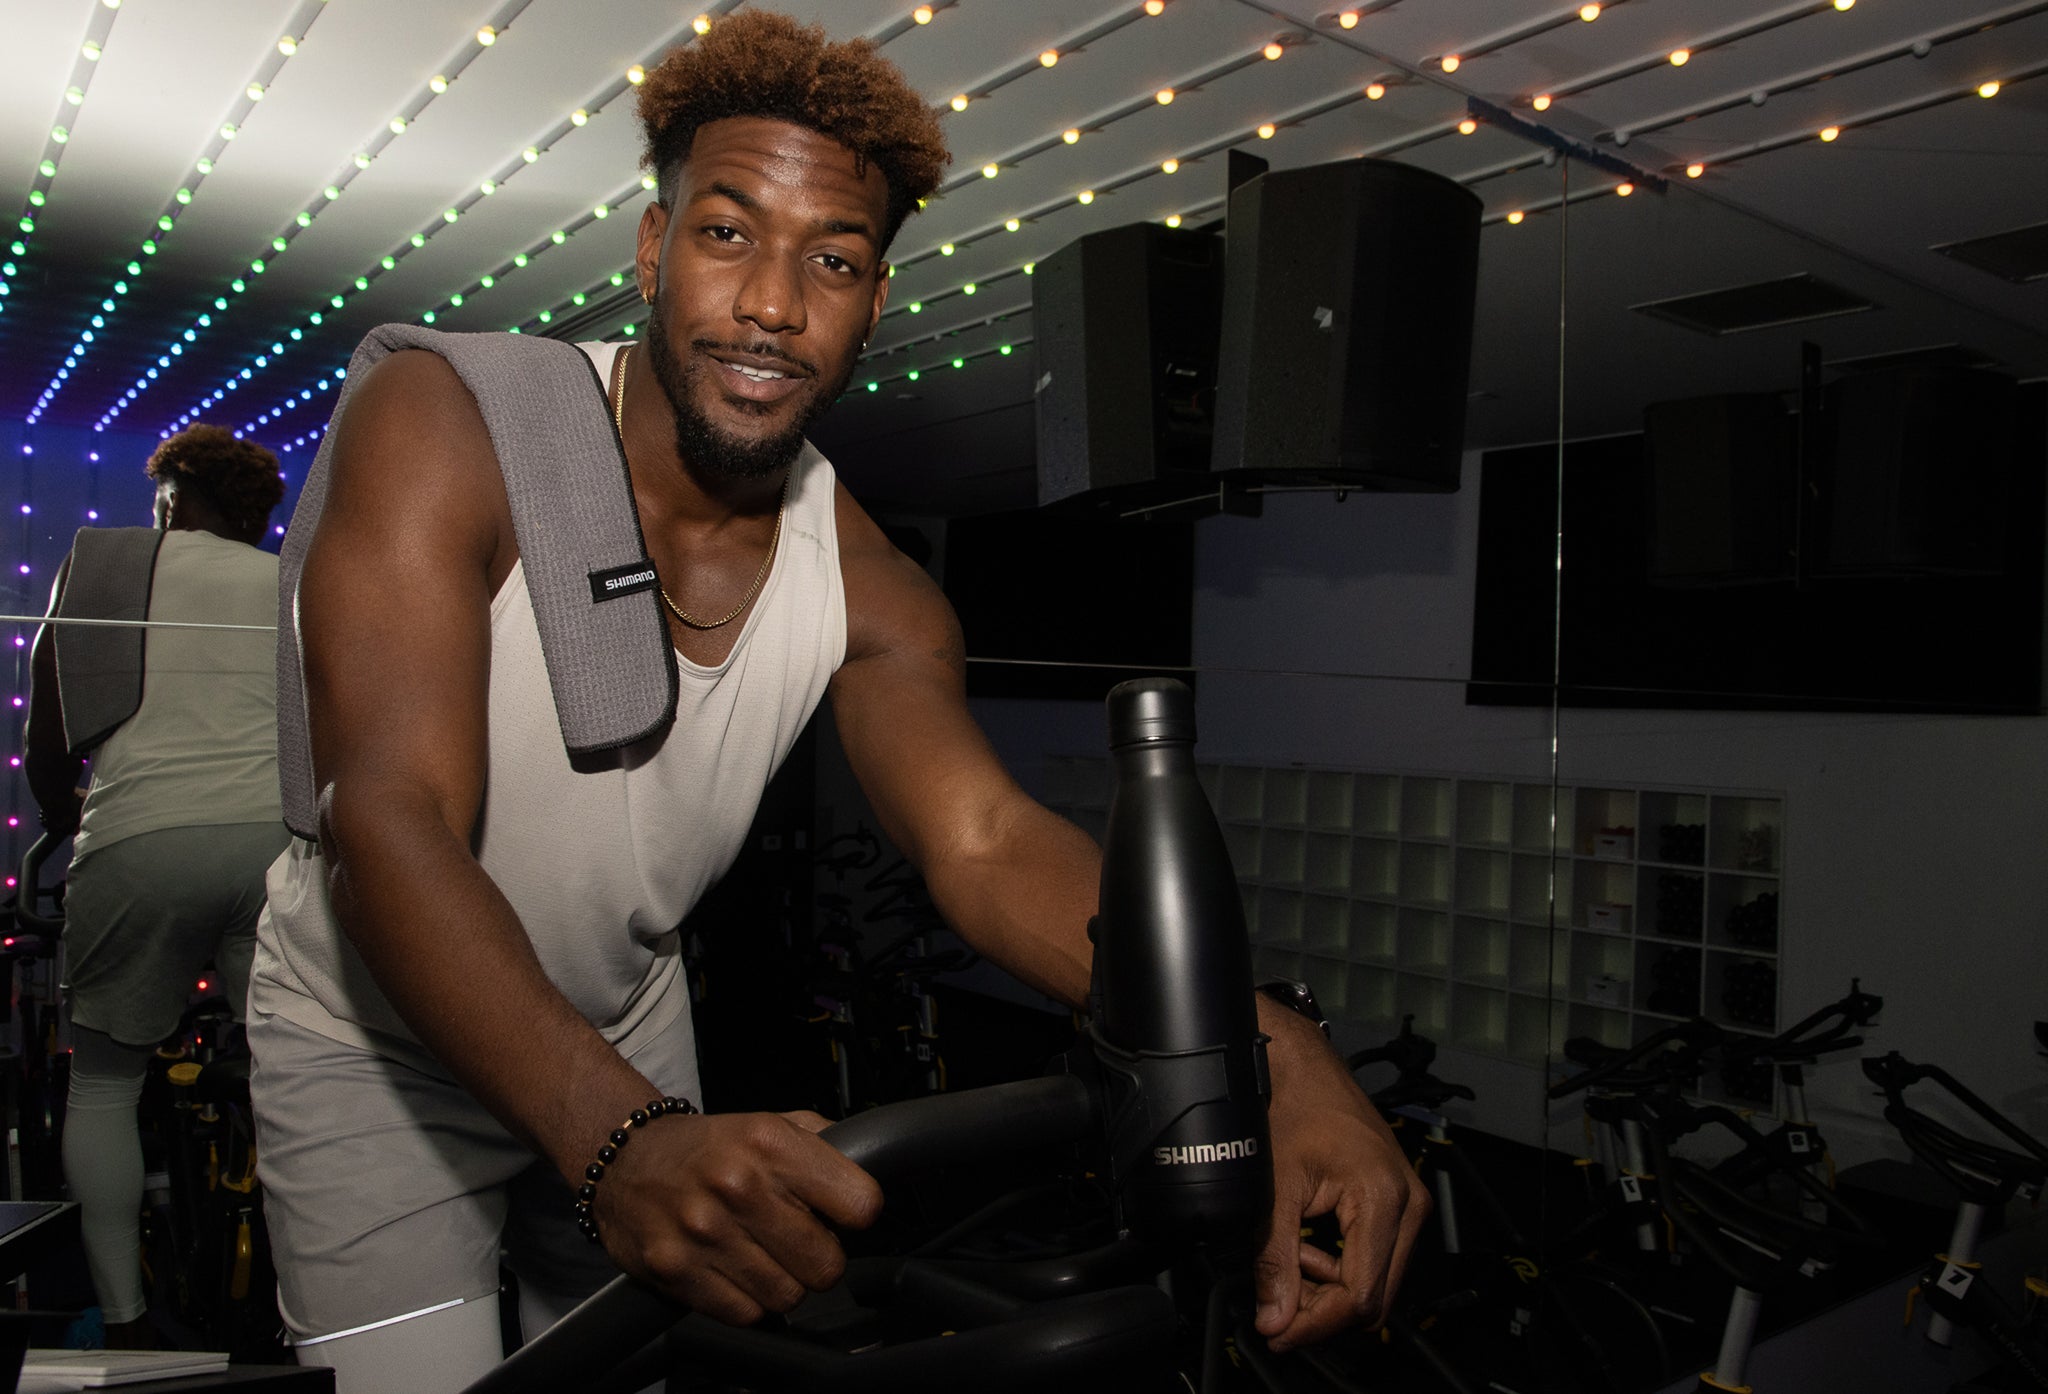 Demar Jackson Riding indoor cycling with Shimano workout Towel